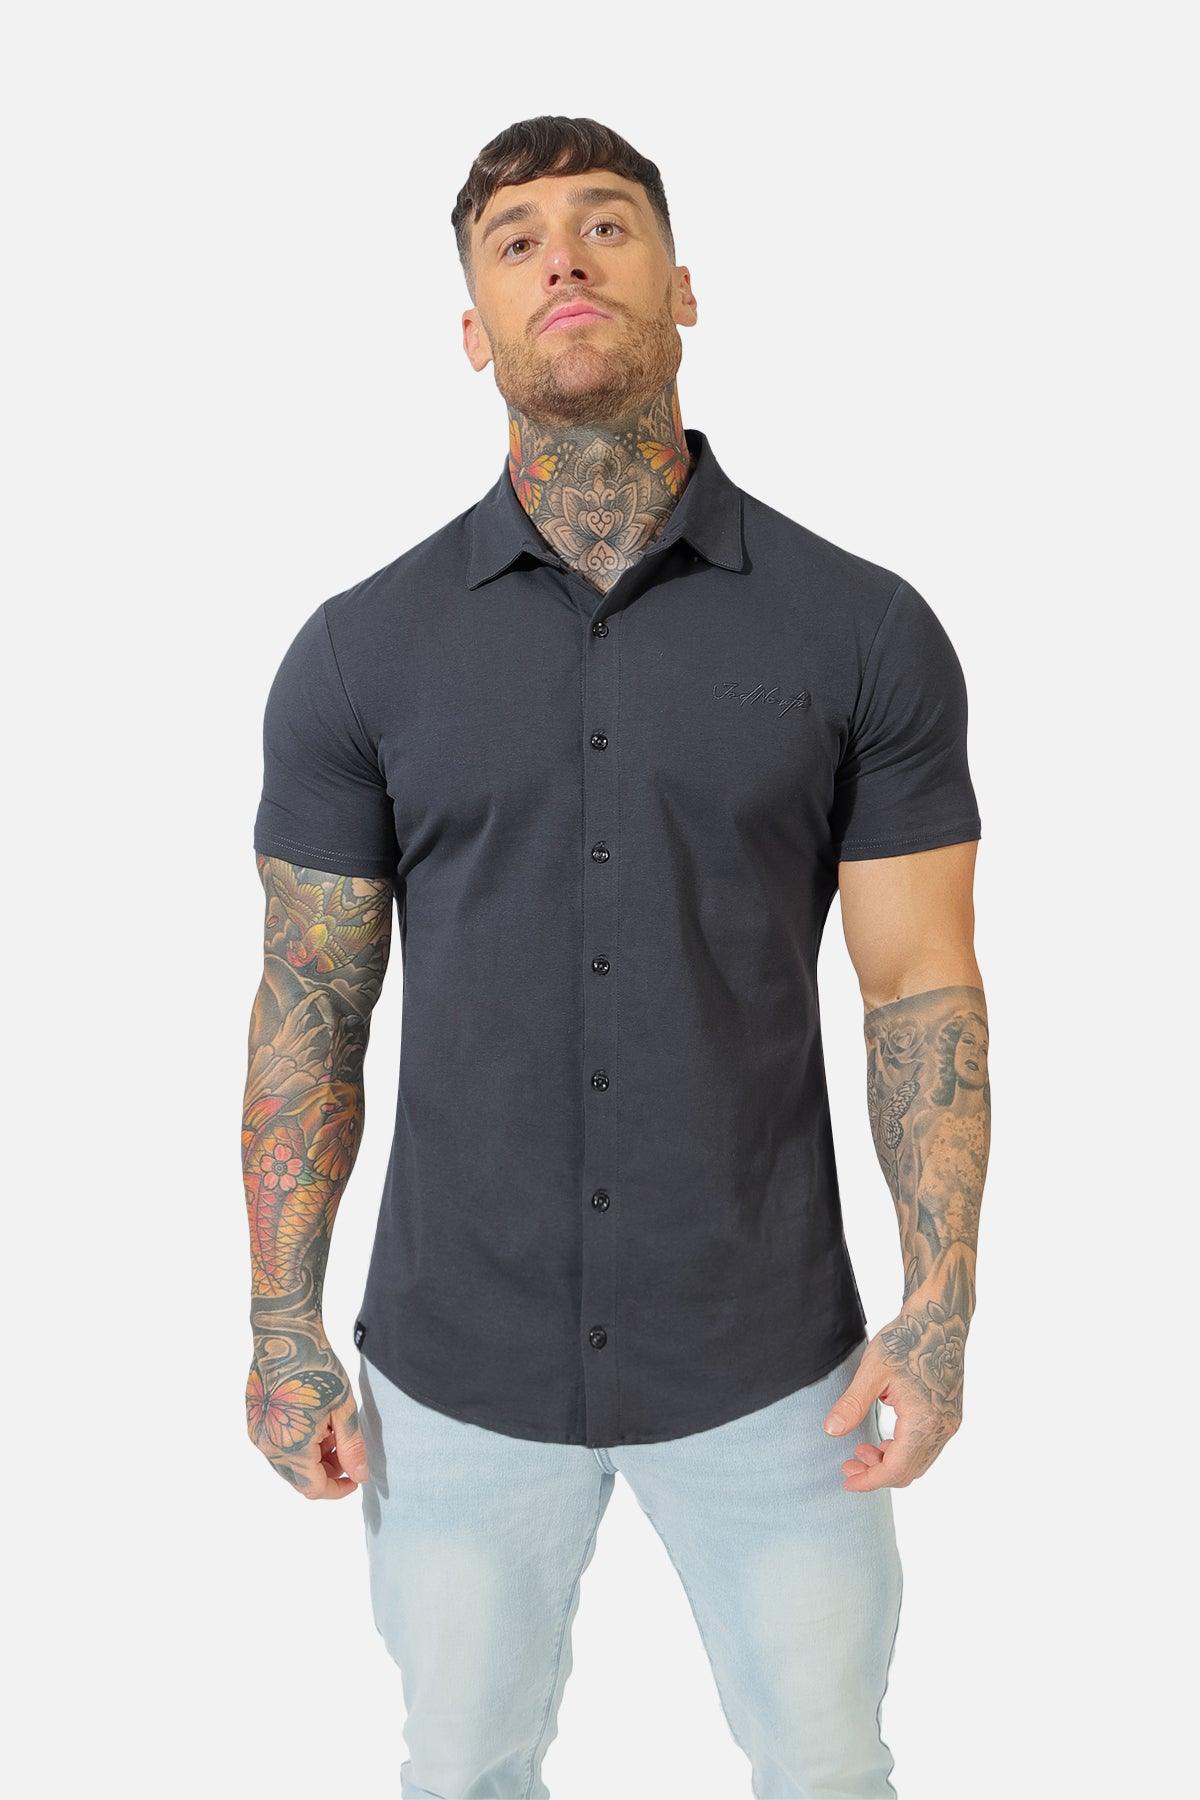 Button-up Muscle T-Shirt - Dark Gray - Jed North